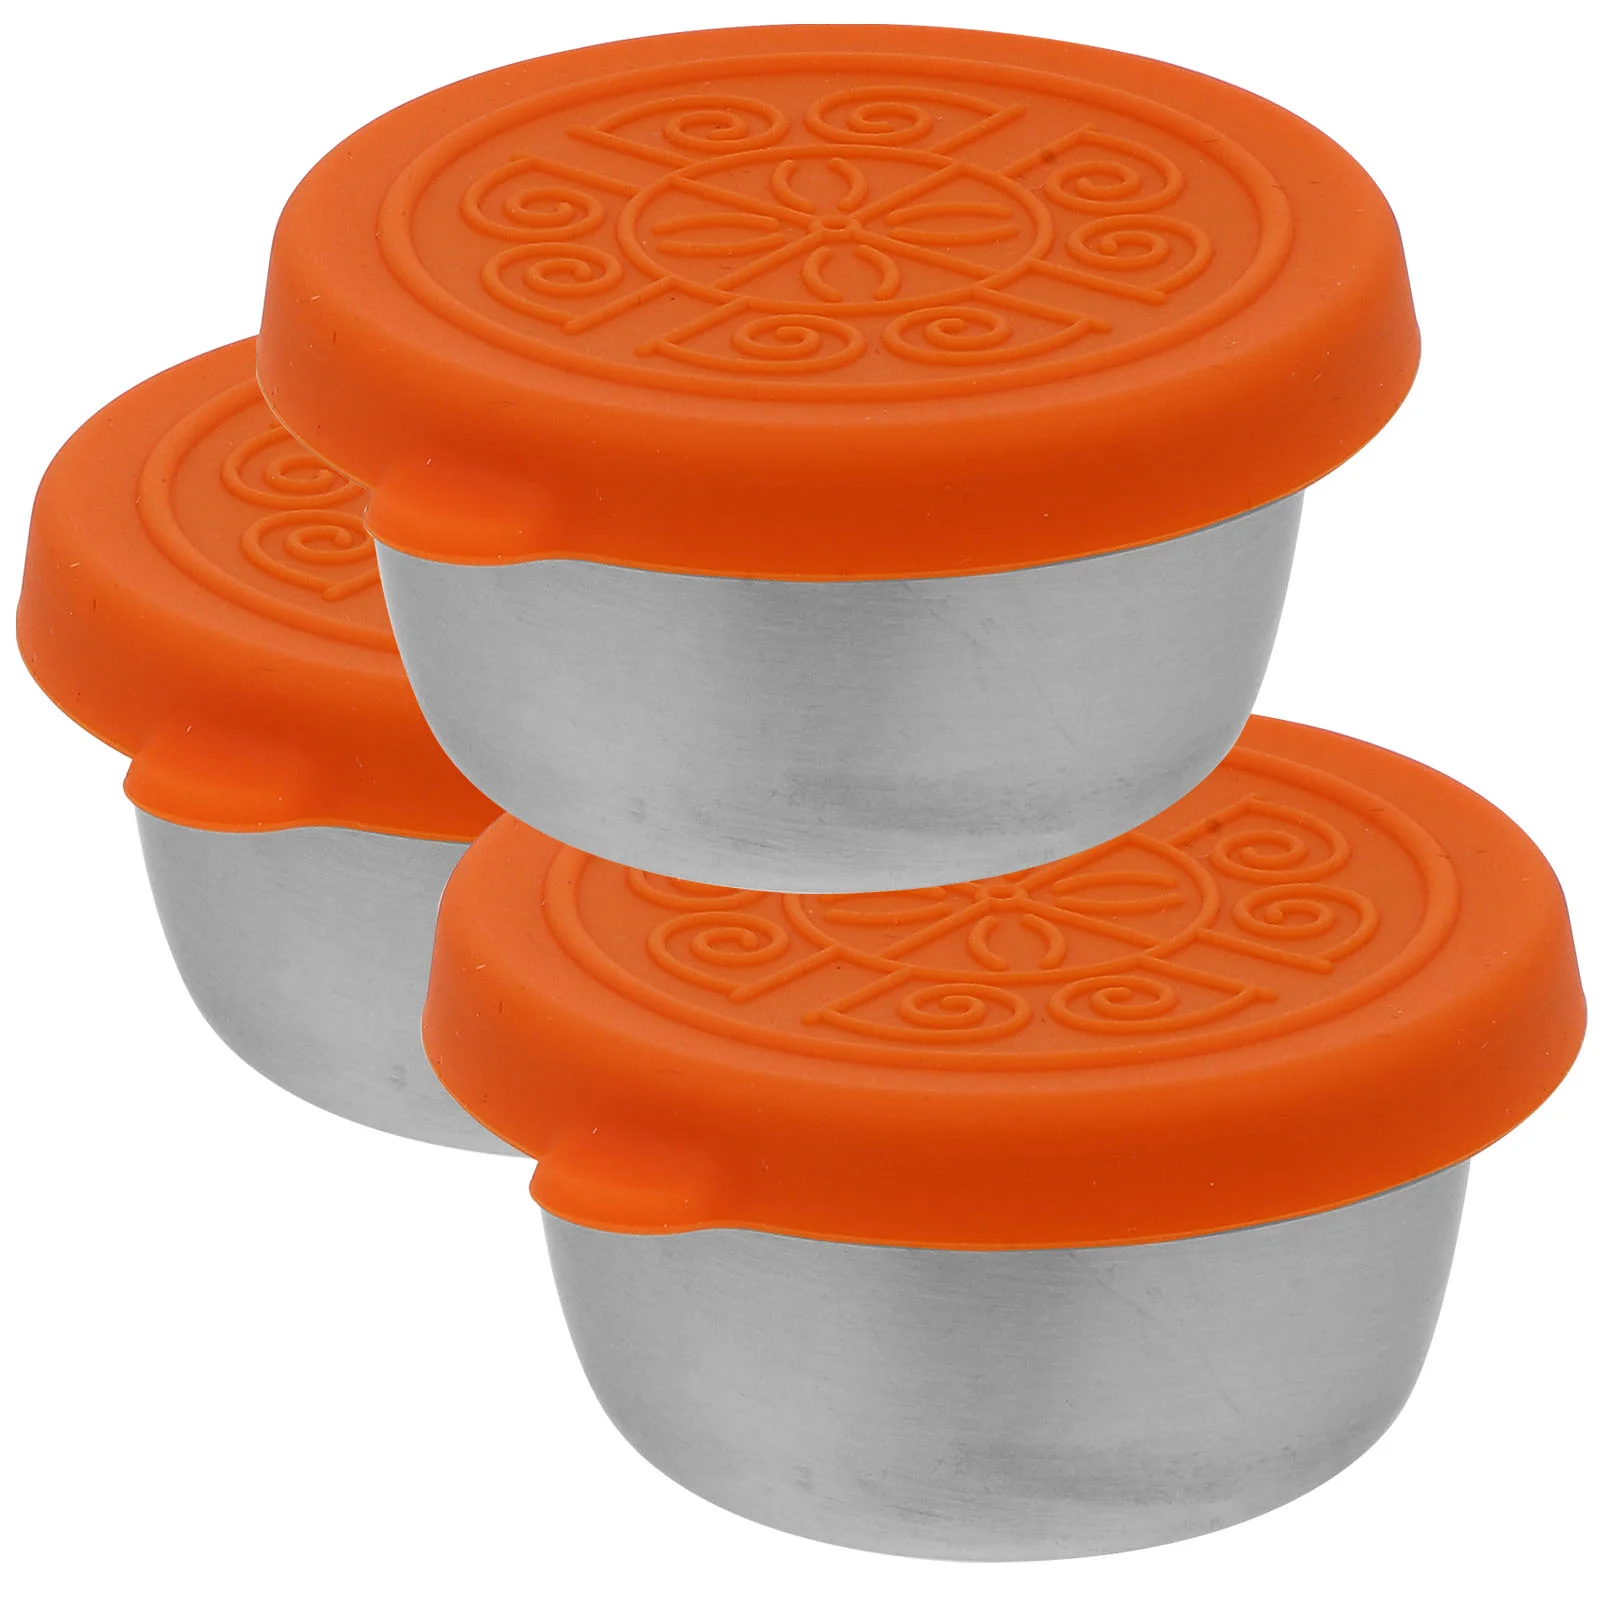 

3 Pcs Food Containers Sauce Cups Lids Salad Dressing Kitchen Utensils Go Stainless Steel Small Condiment Travel